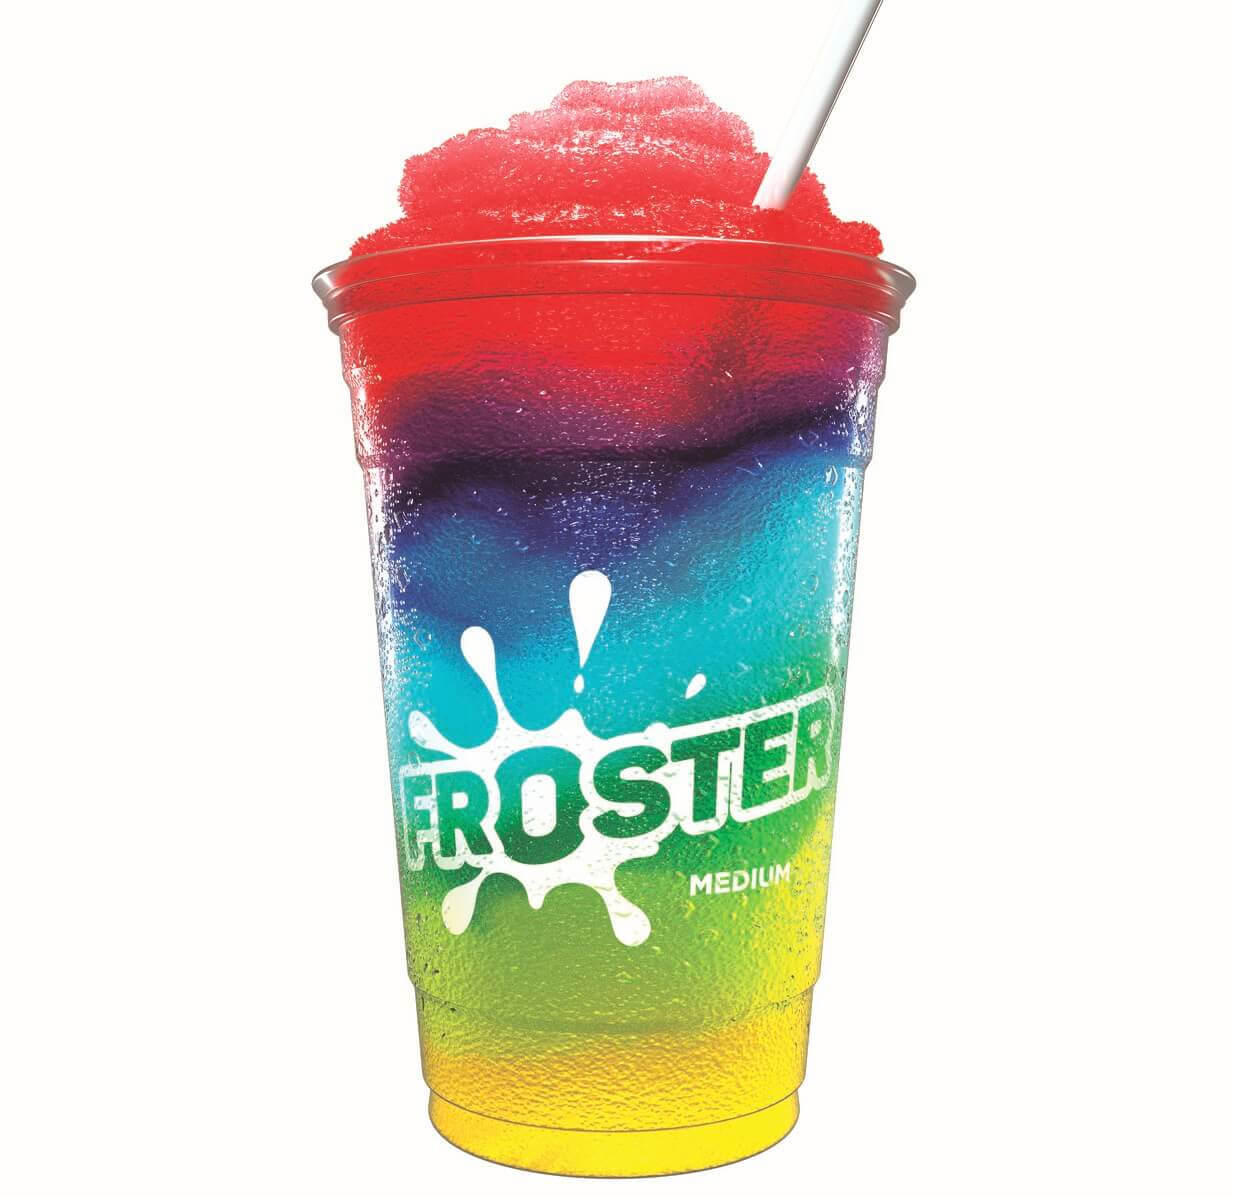 https://www.circlek.com/sites/default/files/styles/tinypng/public/2018-11/froster_rainbow_with_straw_no_bkgrd_3.jpg?itok=duL4sewm